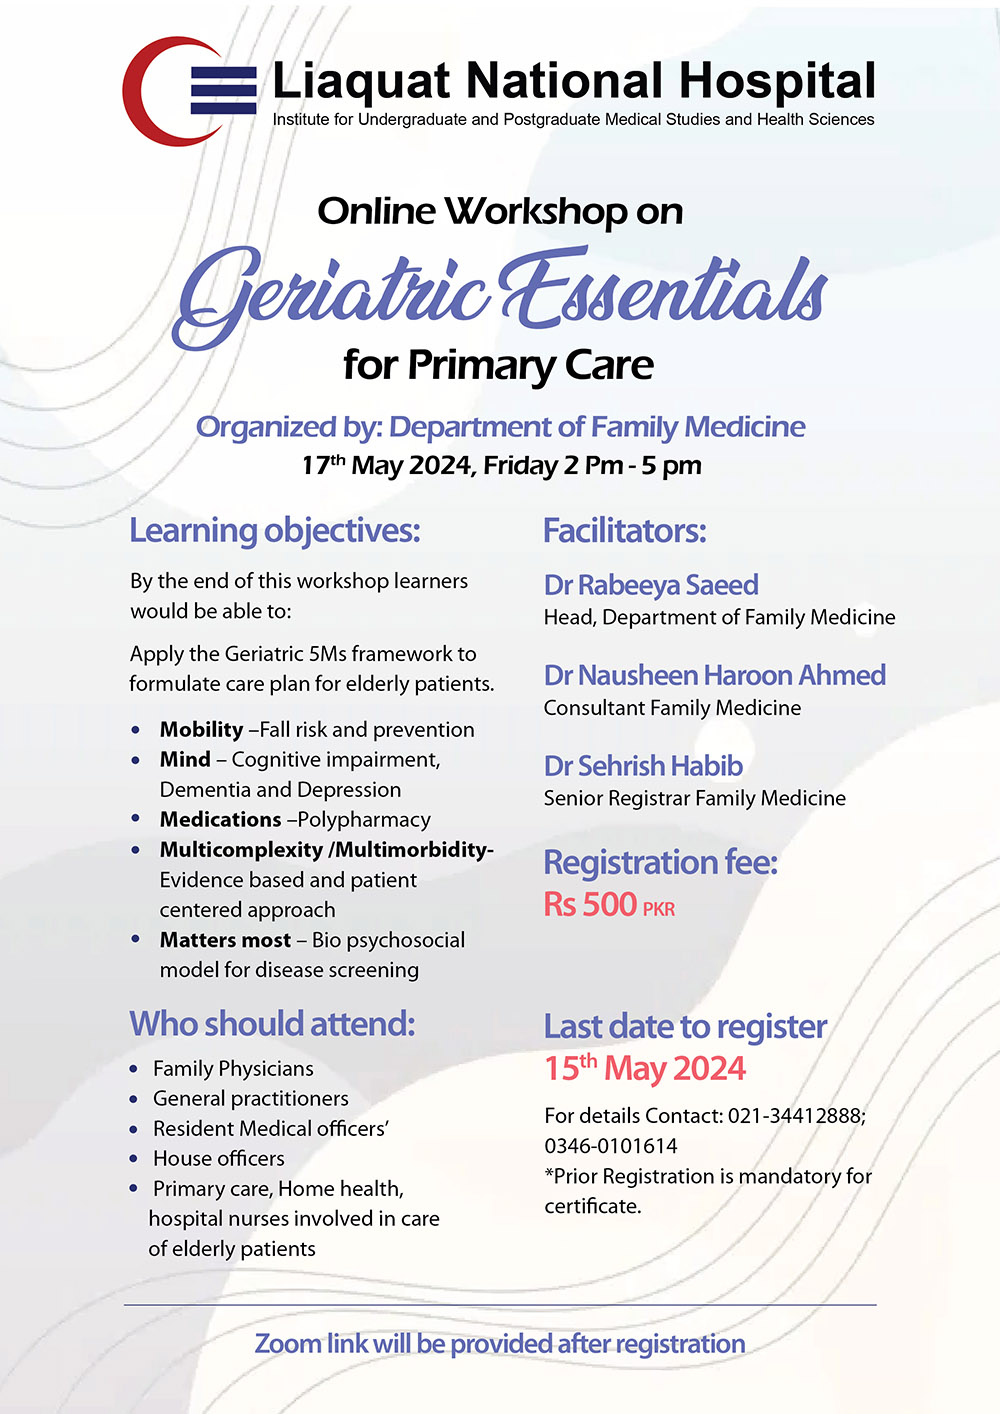 Online Workshop on Geriatric Essentials for Primary Care, May 17, 2024